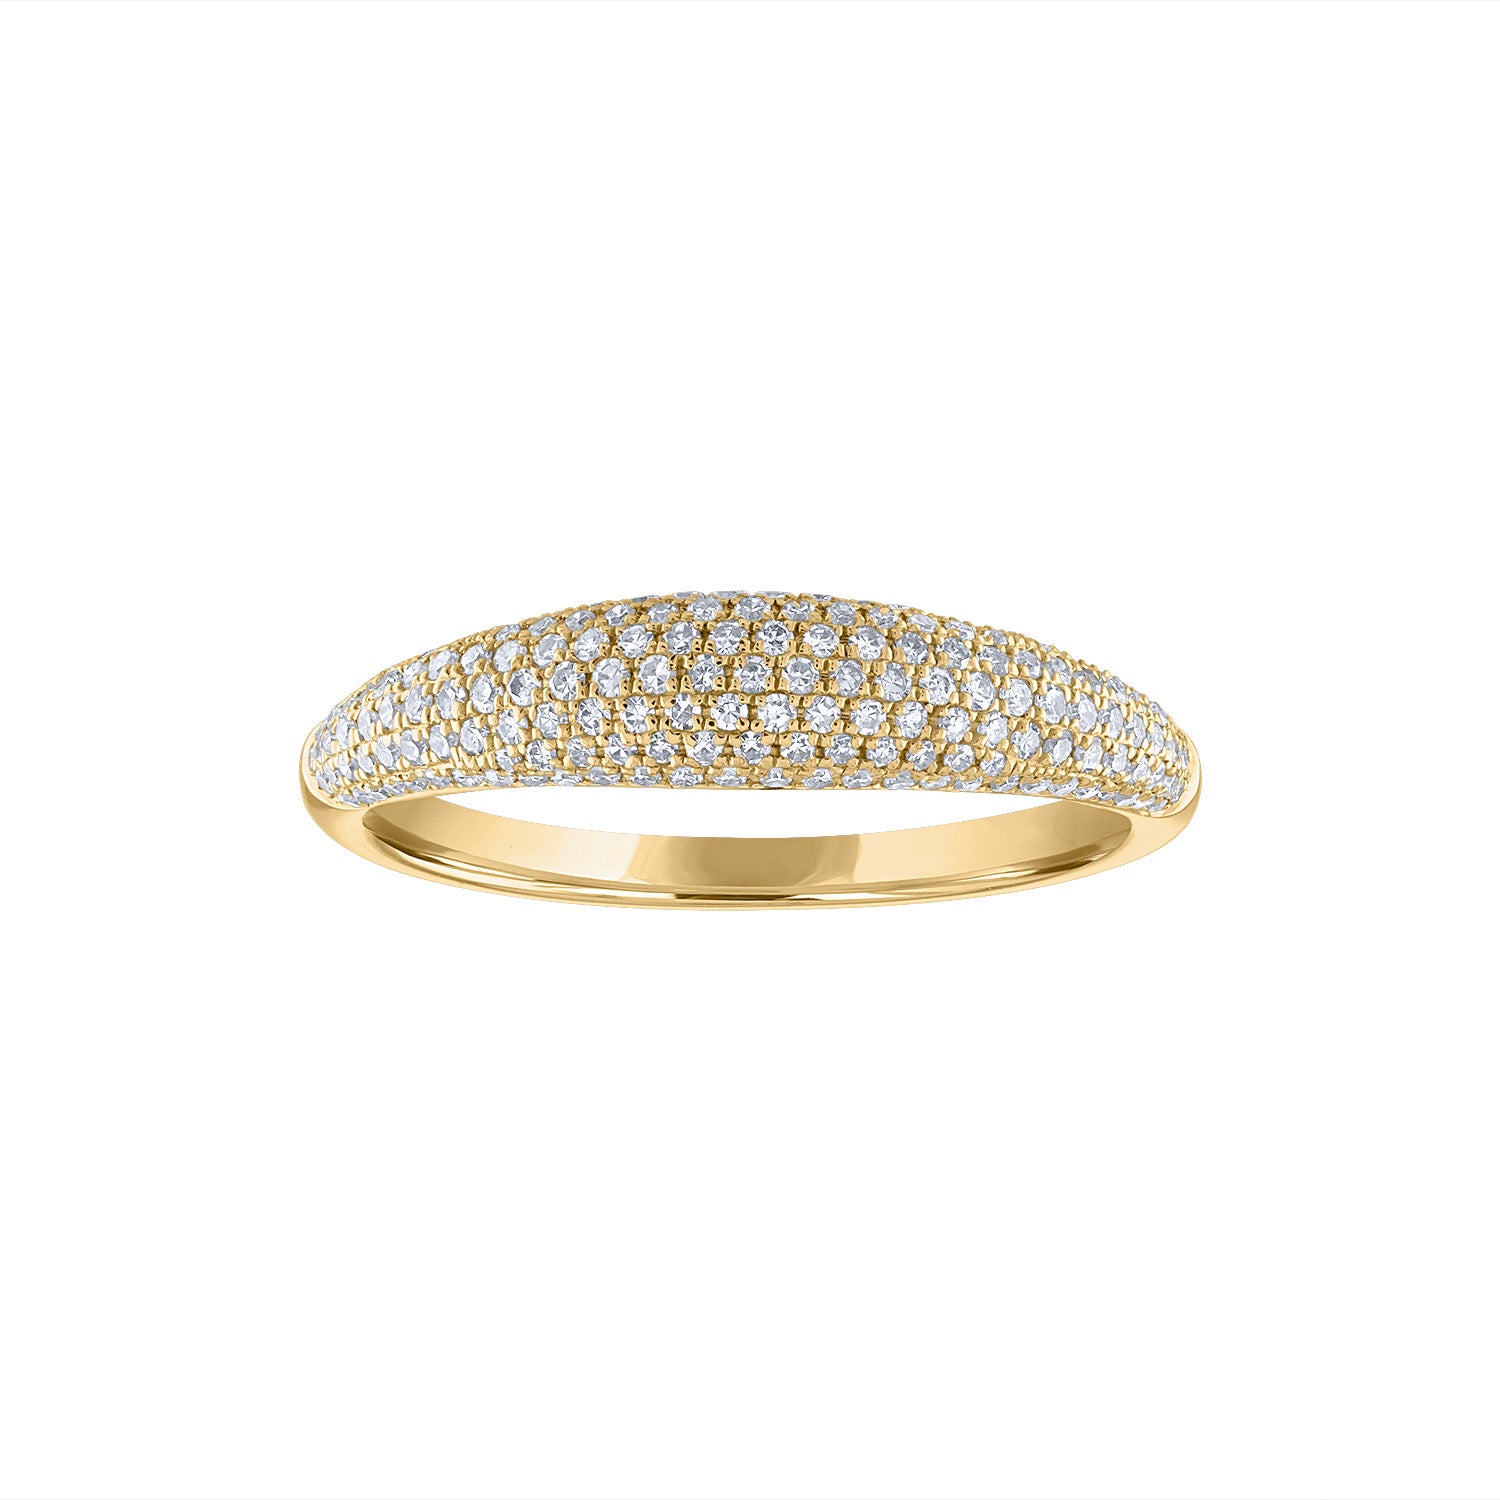 14KT GOLD PAVE DIAMOND STACKABLE DOME RING